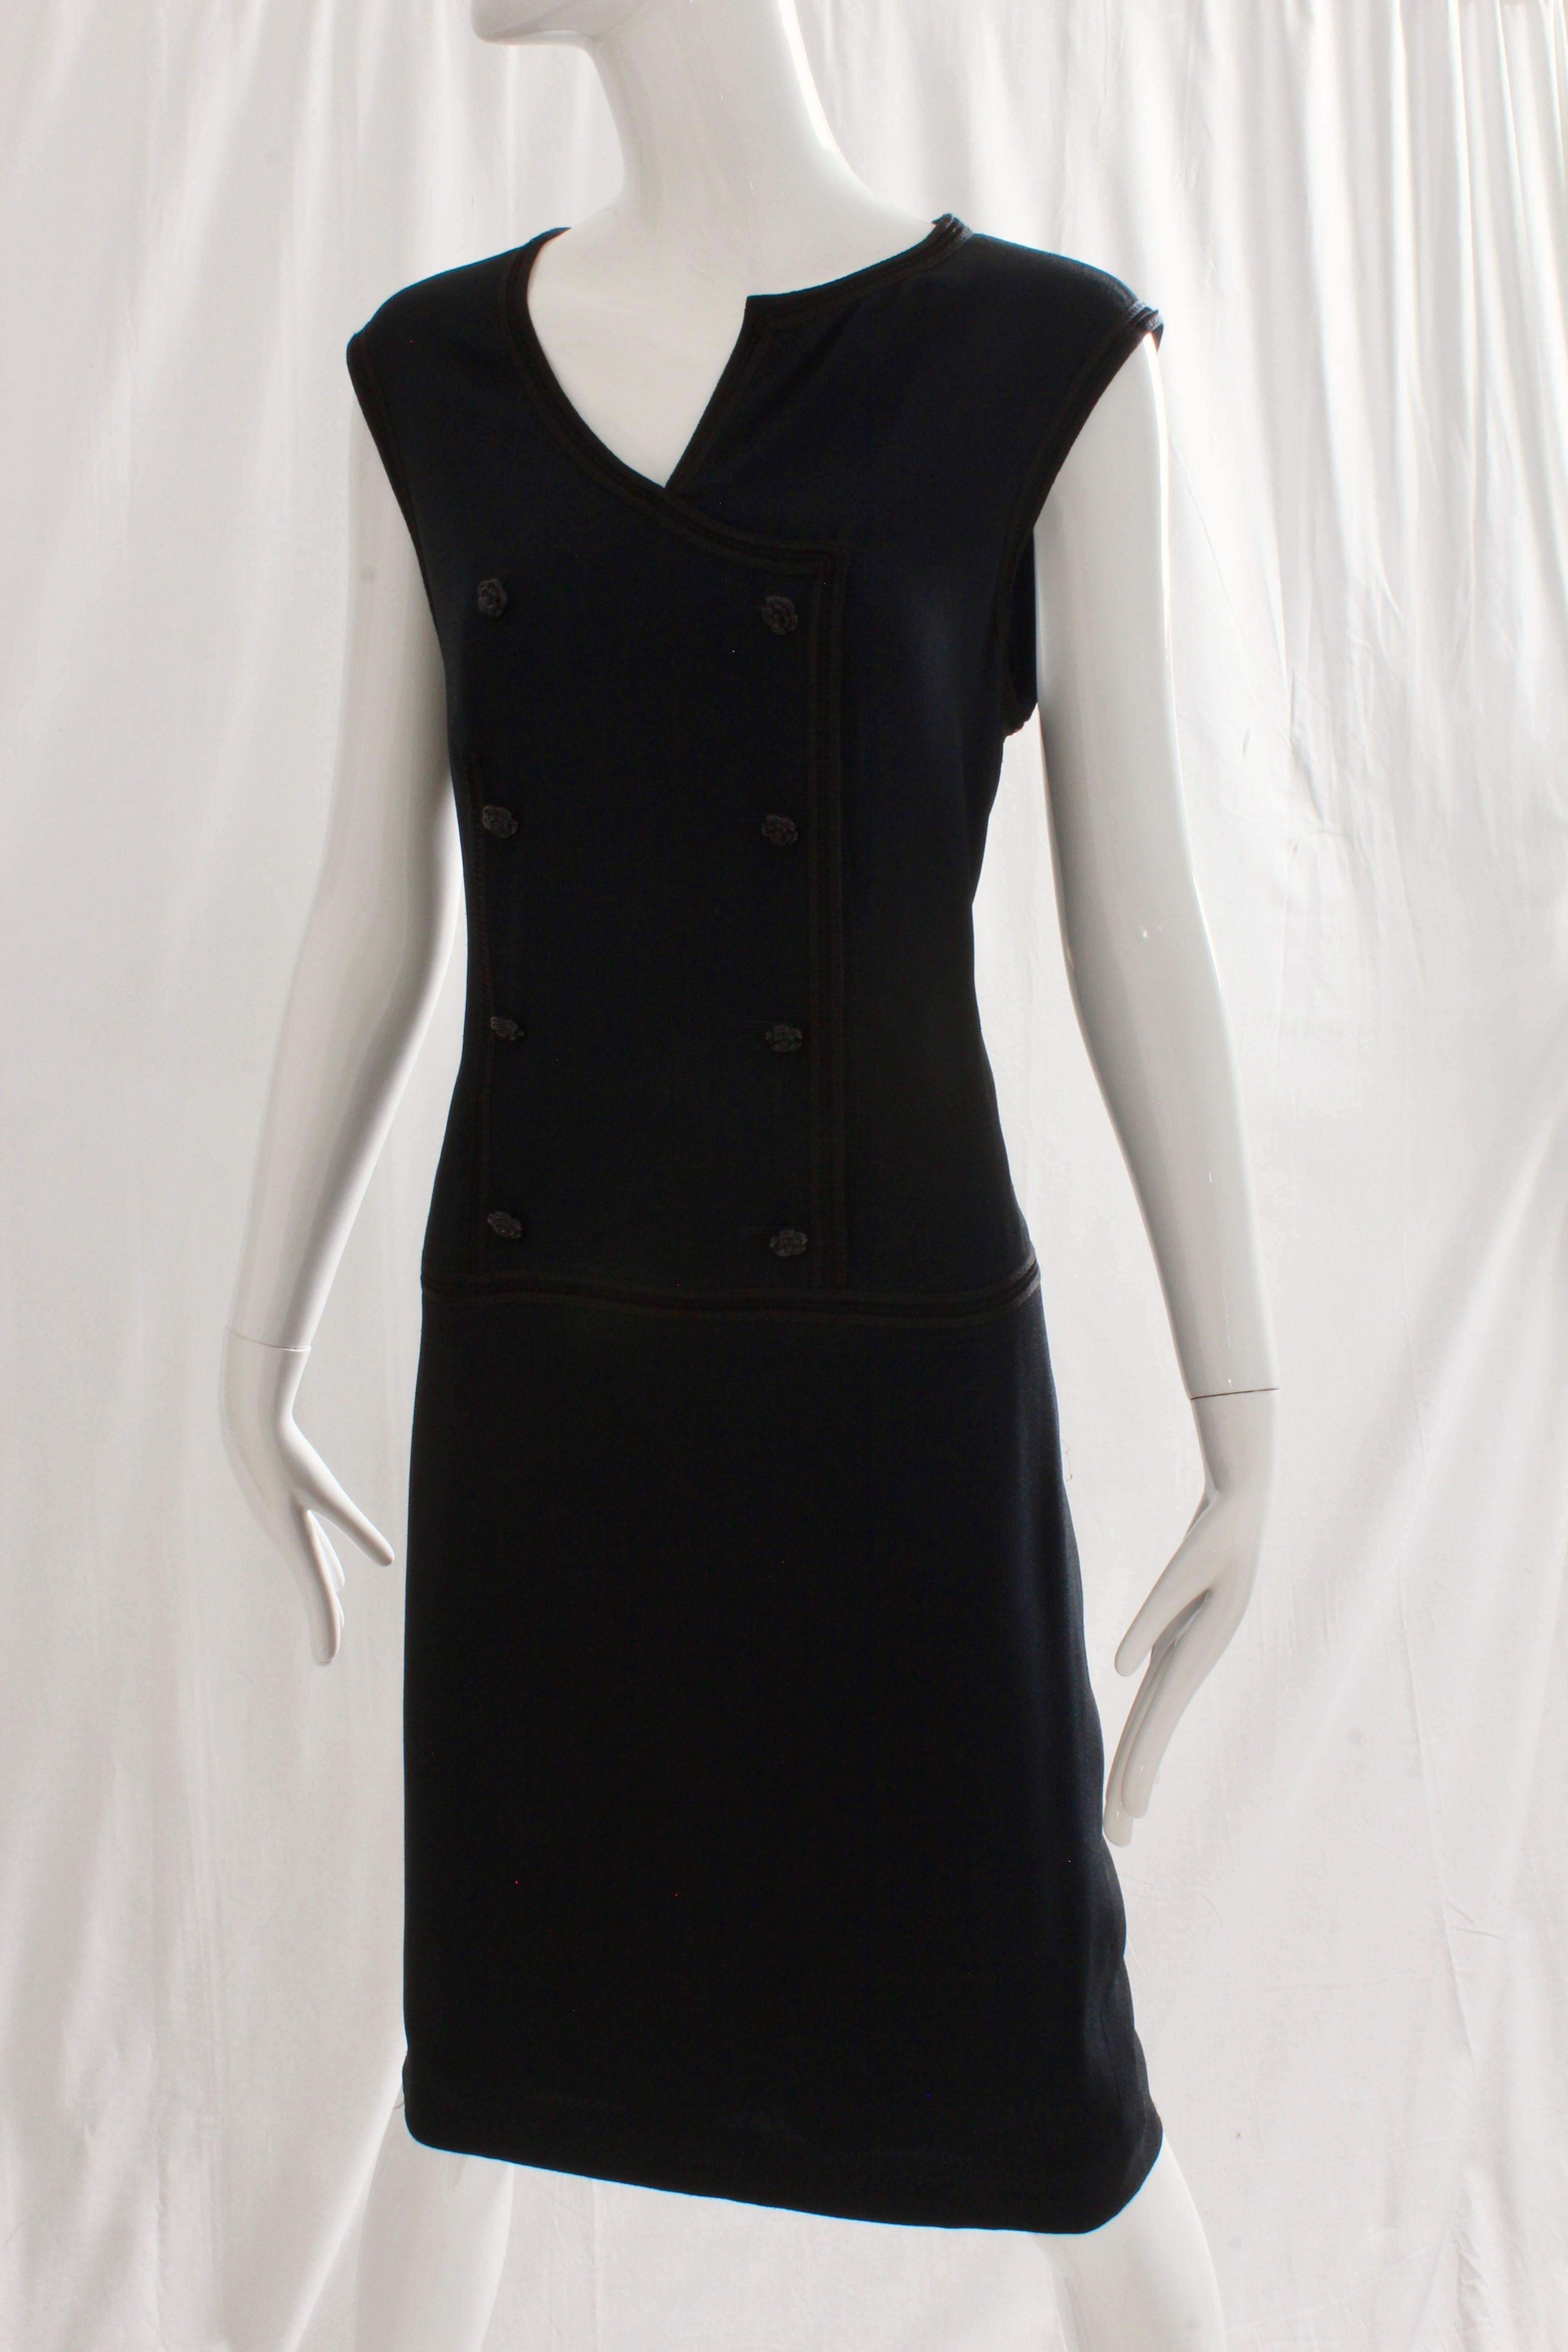 Chanel Sleeveless Dress with Asymmetric Collar and Camellia Buttons Navy Size 44 3